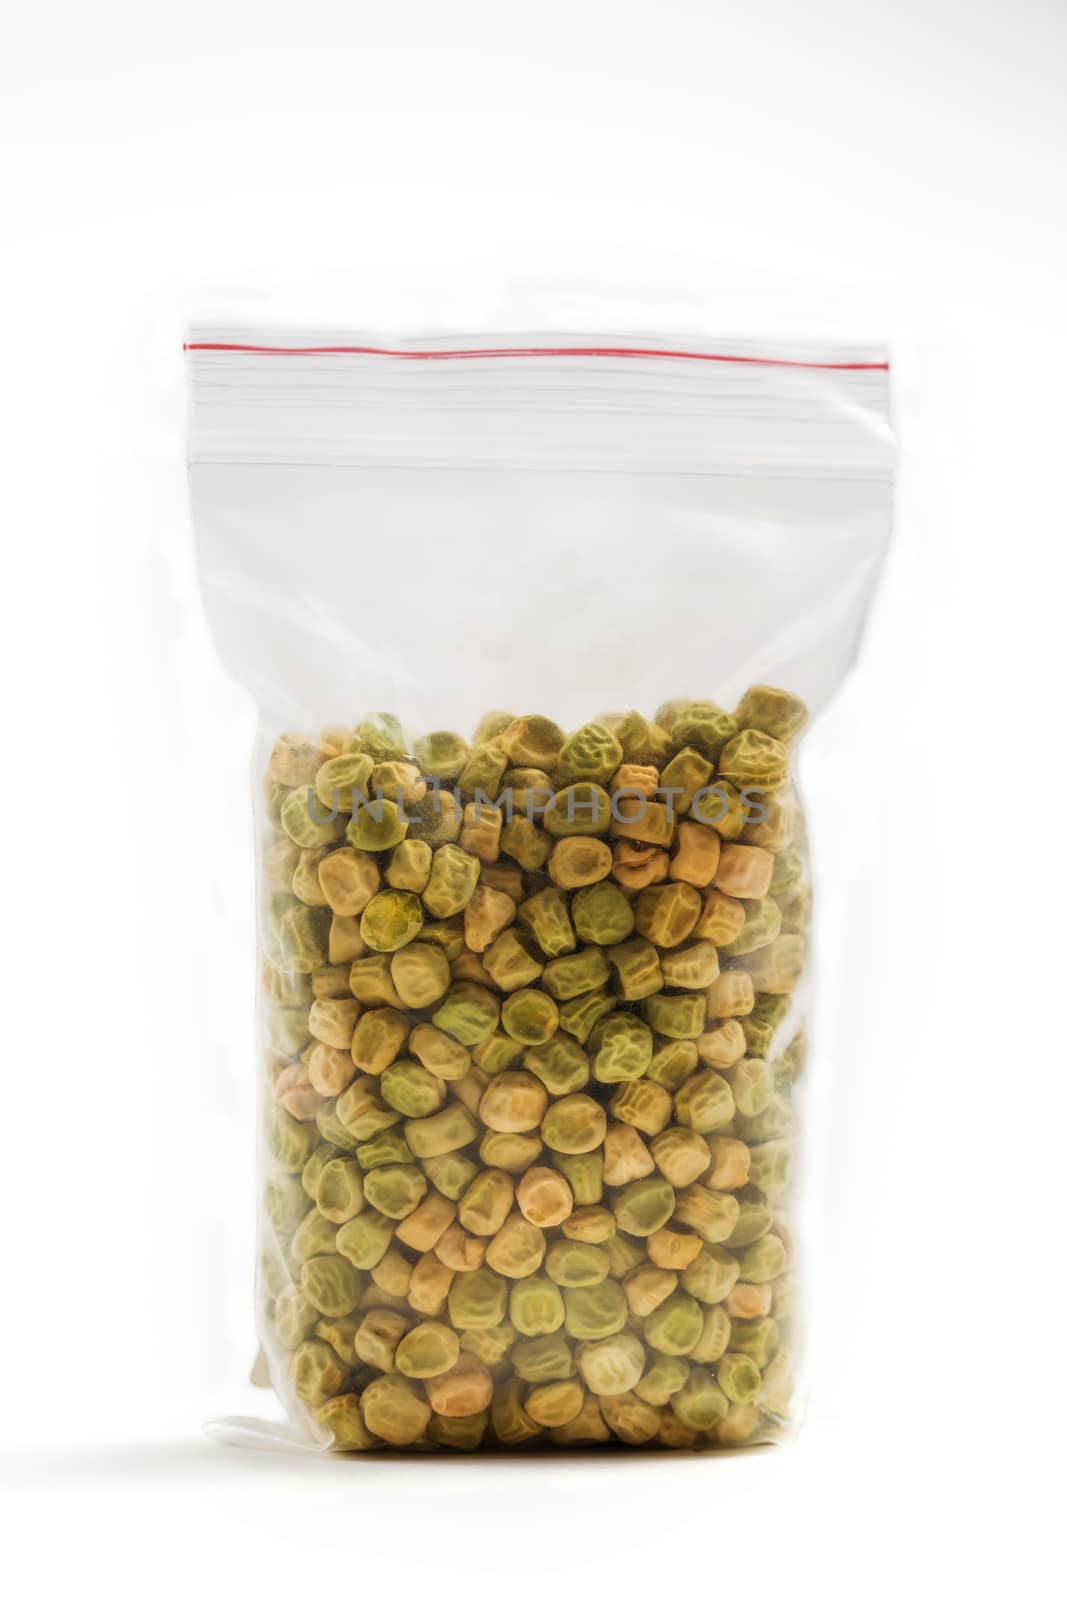 Dry pea seeds for germination isolated on a white background.